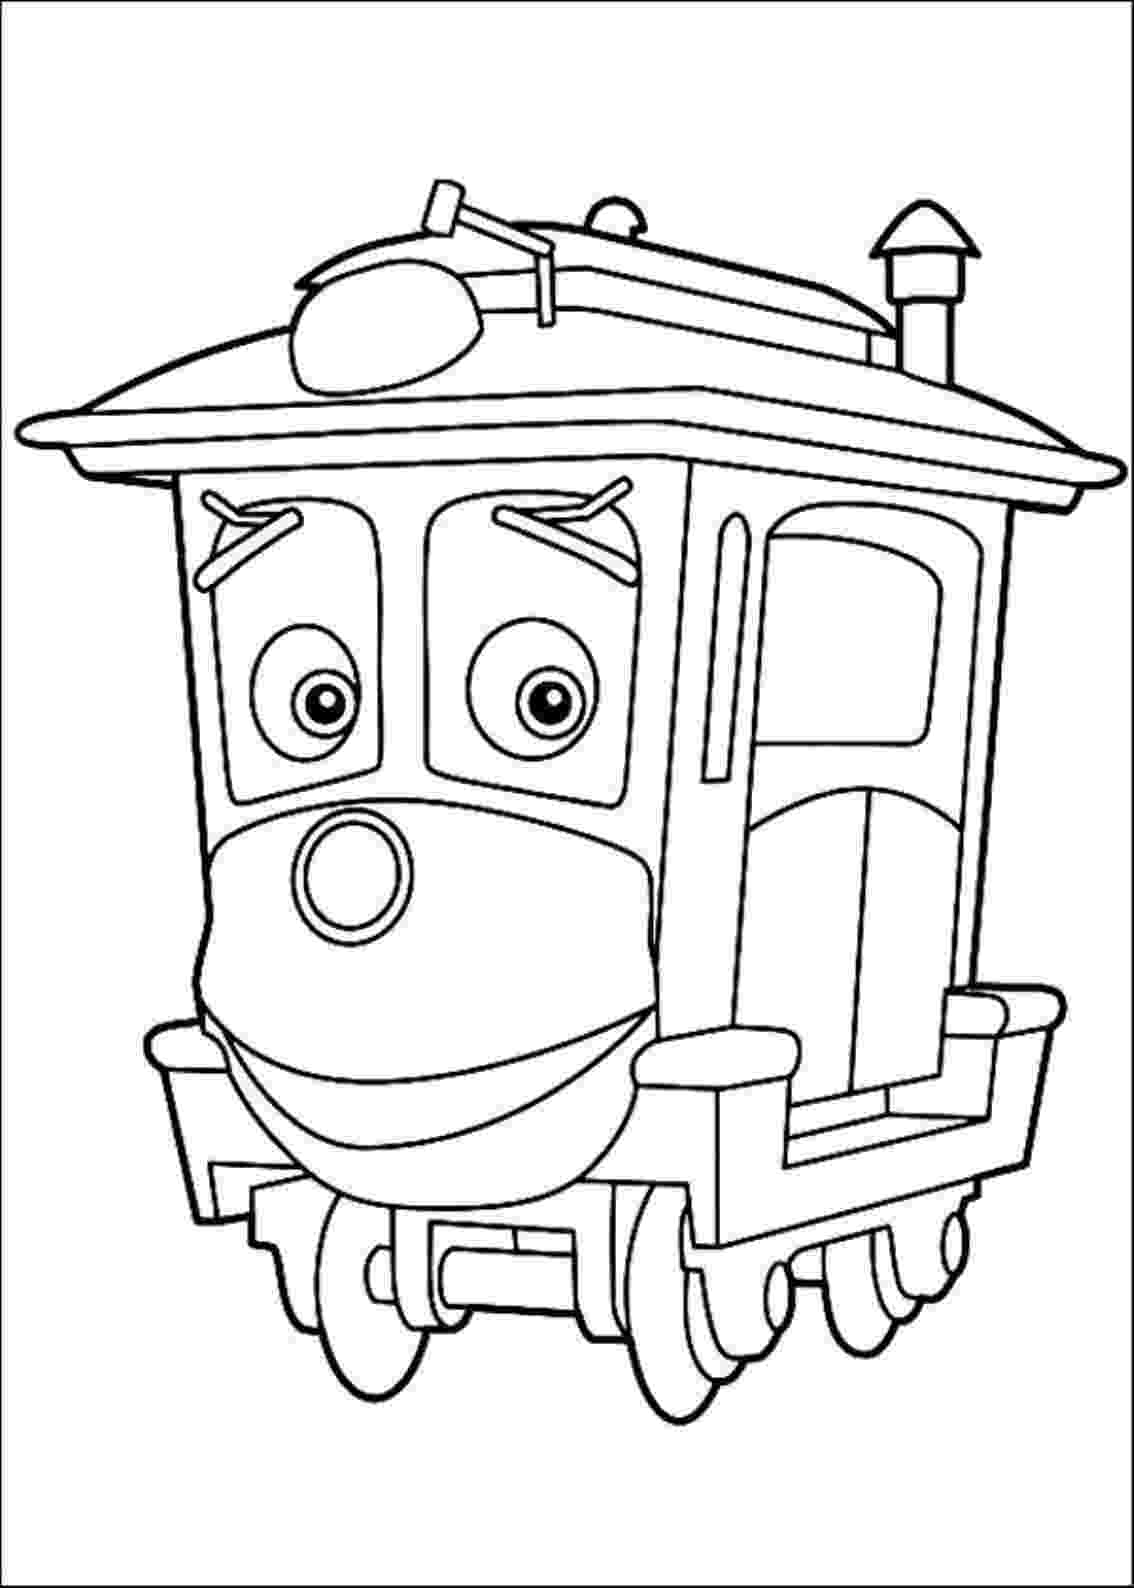 free coloring pages download chuggington coloring pages to download and print for free pages free coloring download 